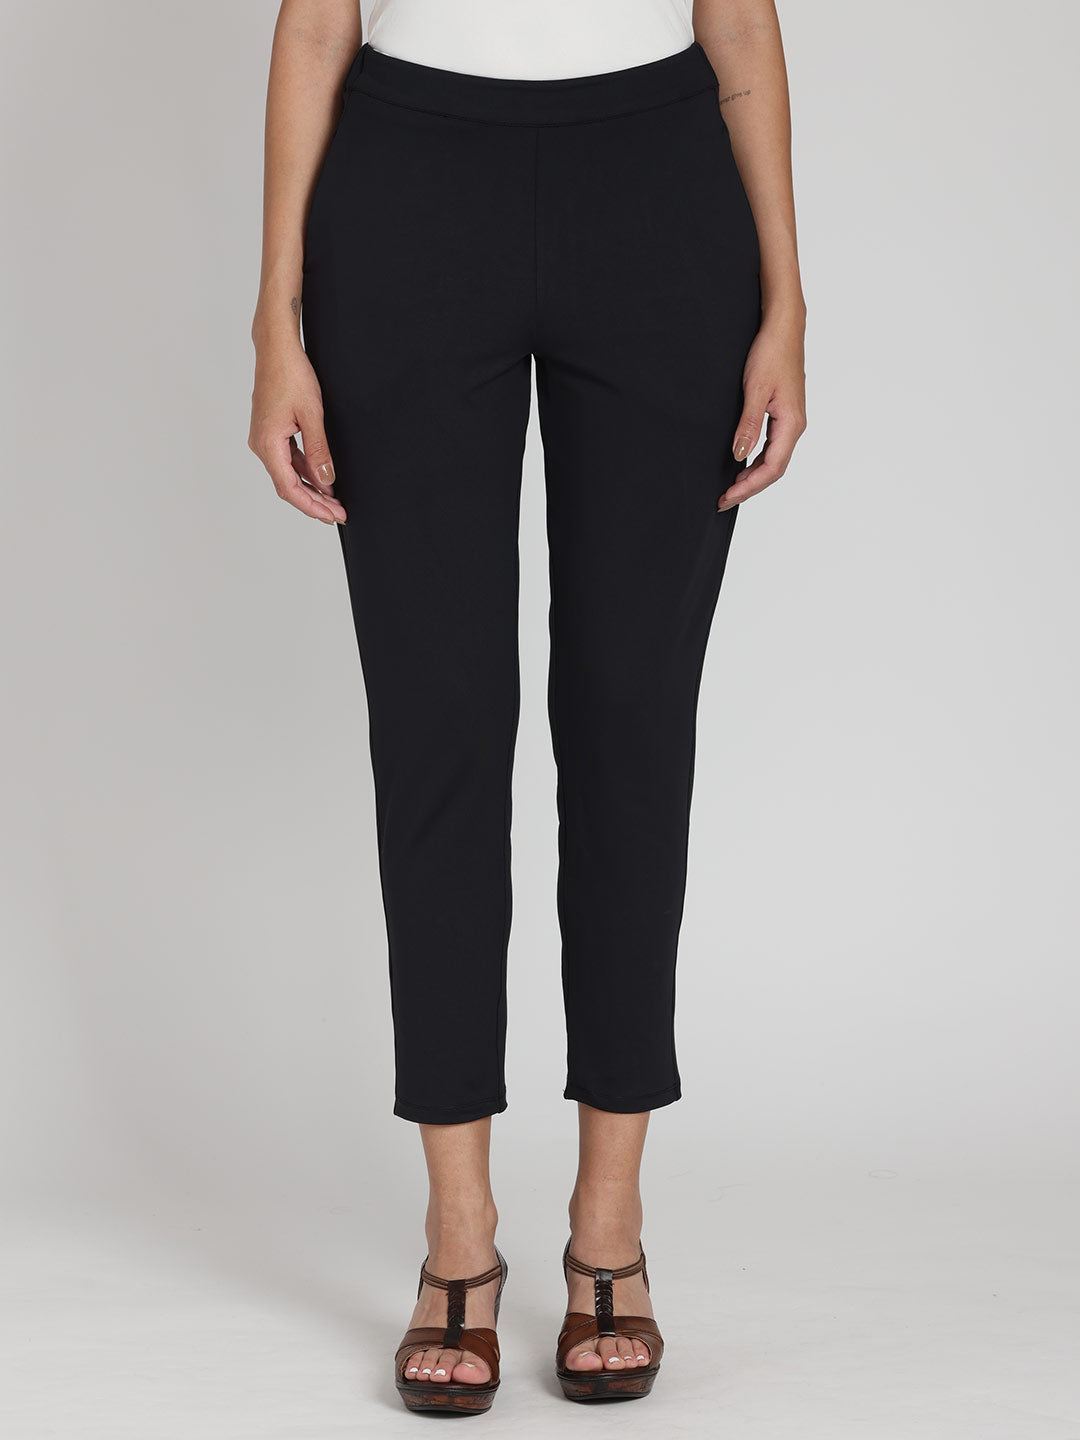 Trousers With Belt Loop - Black Plain (Stretchable) | Zeve Shoes